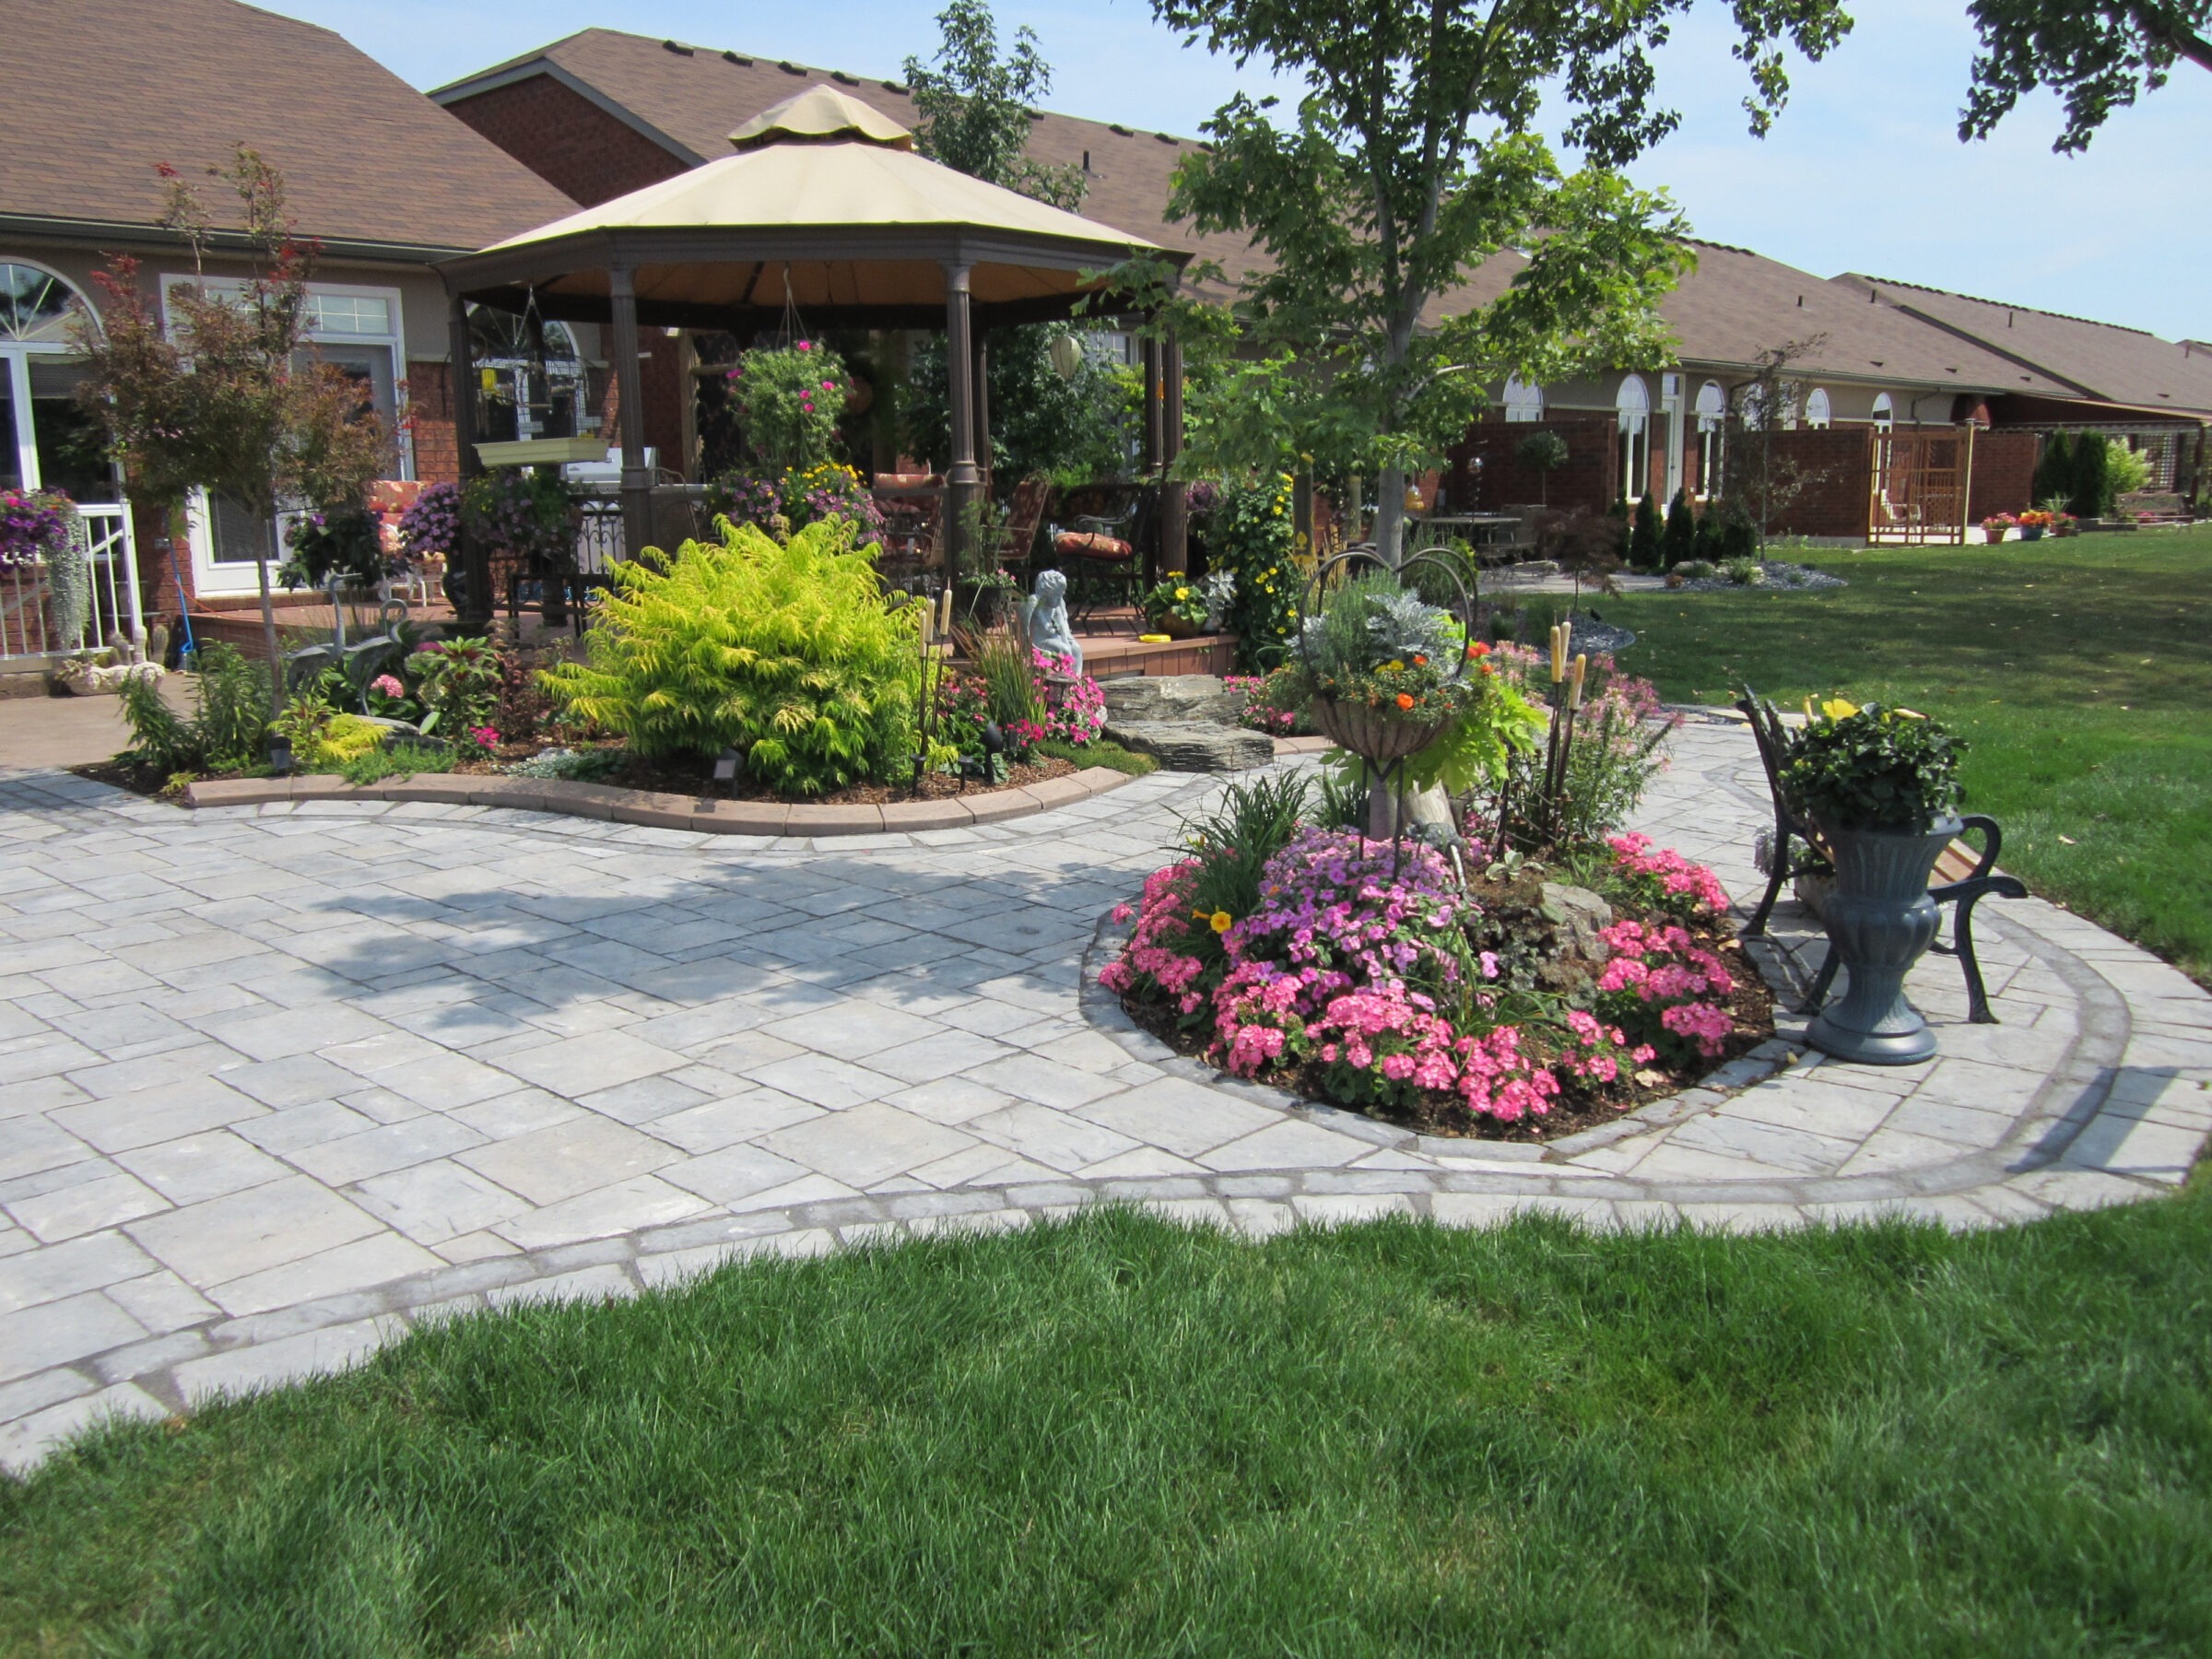 This image shows a well-maintained garden with colorful flowers, a stone pathway, a patio area with a sunshade, green lawn, and a suburban house.